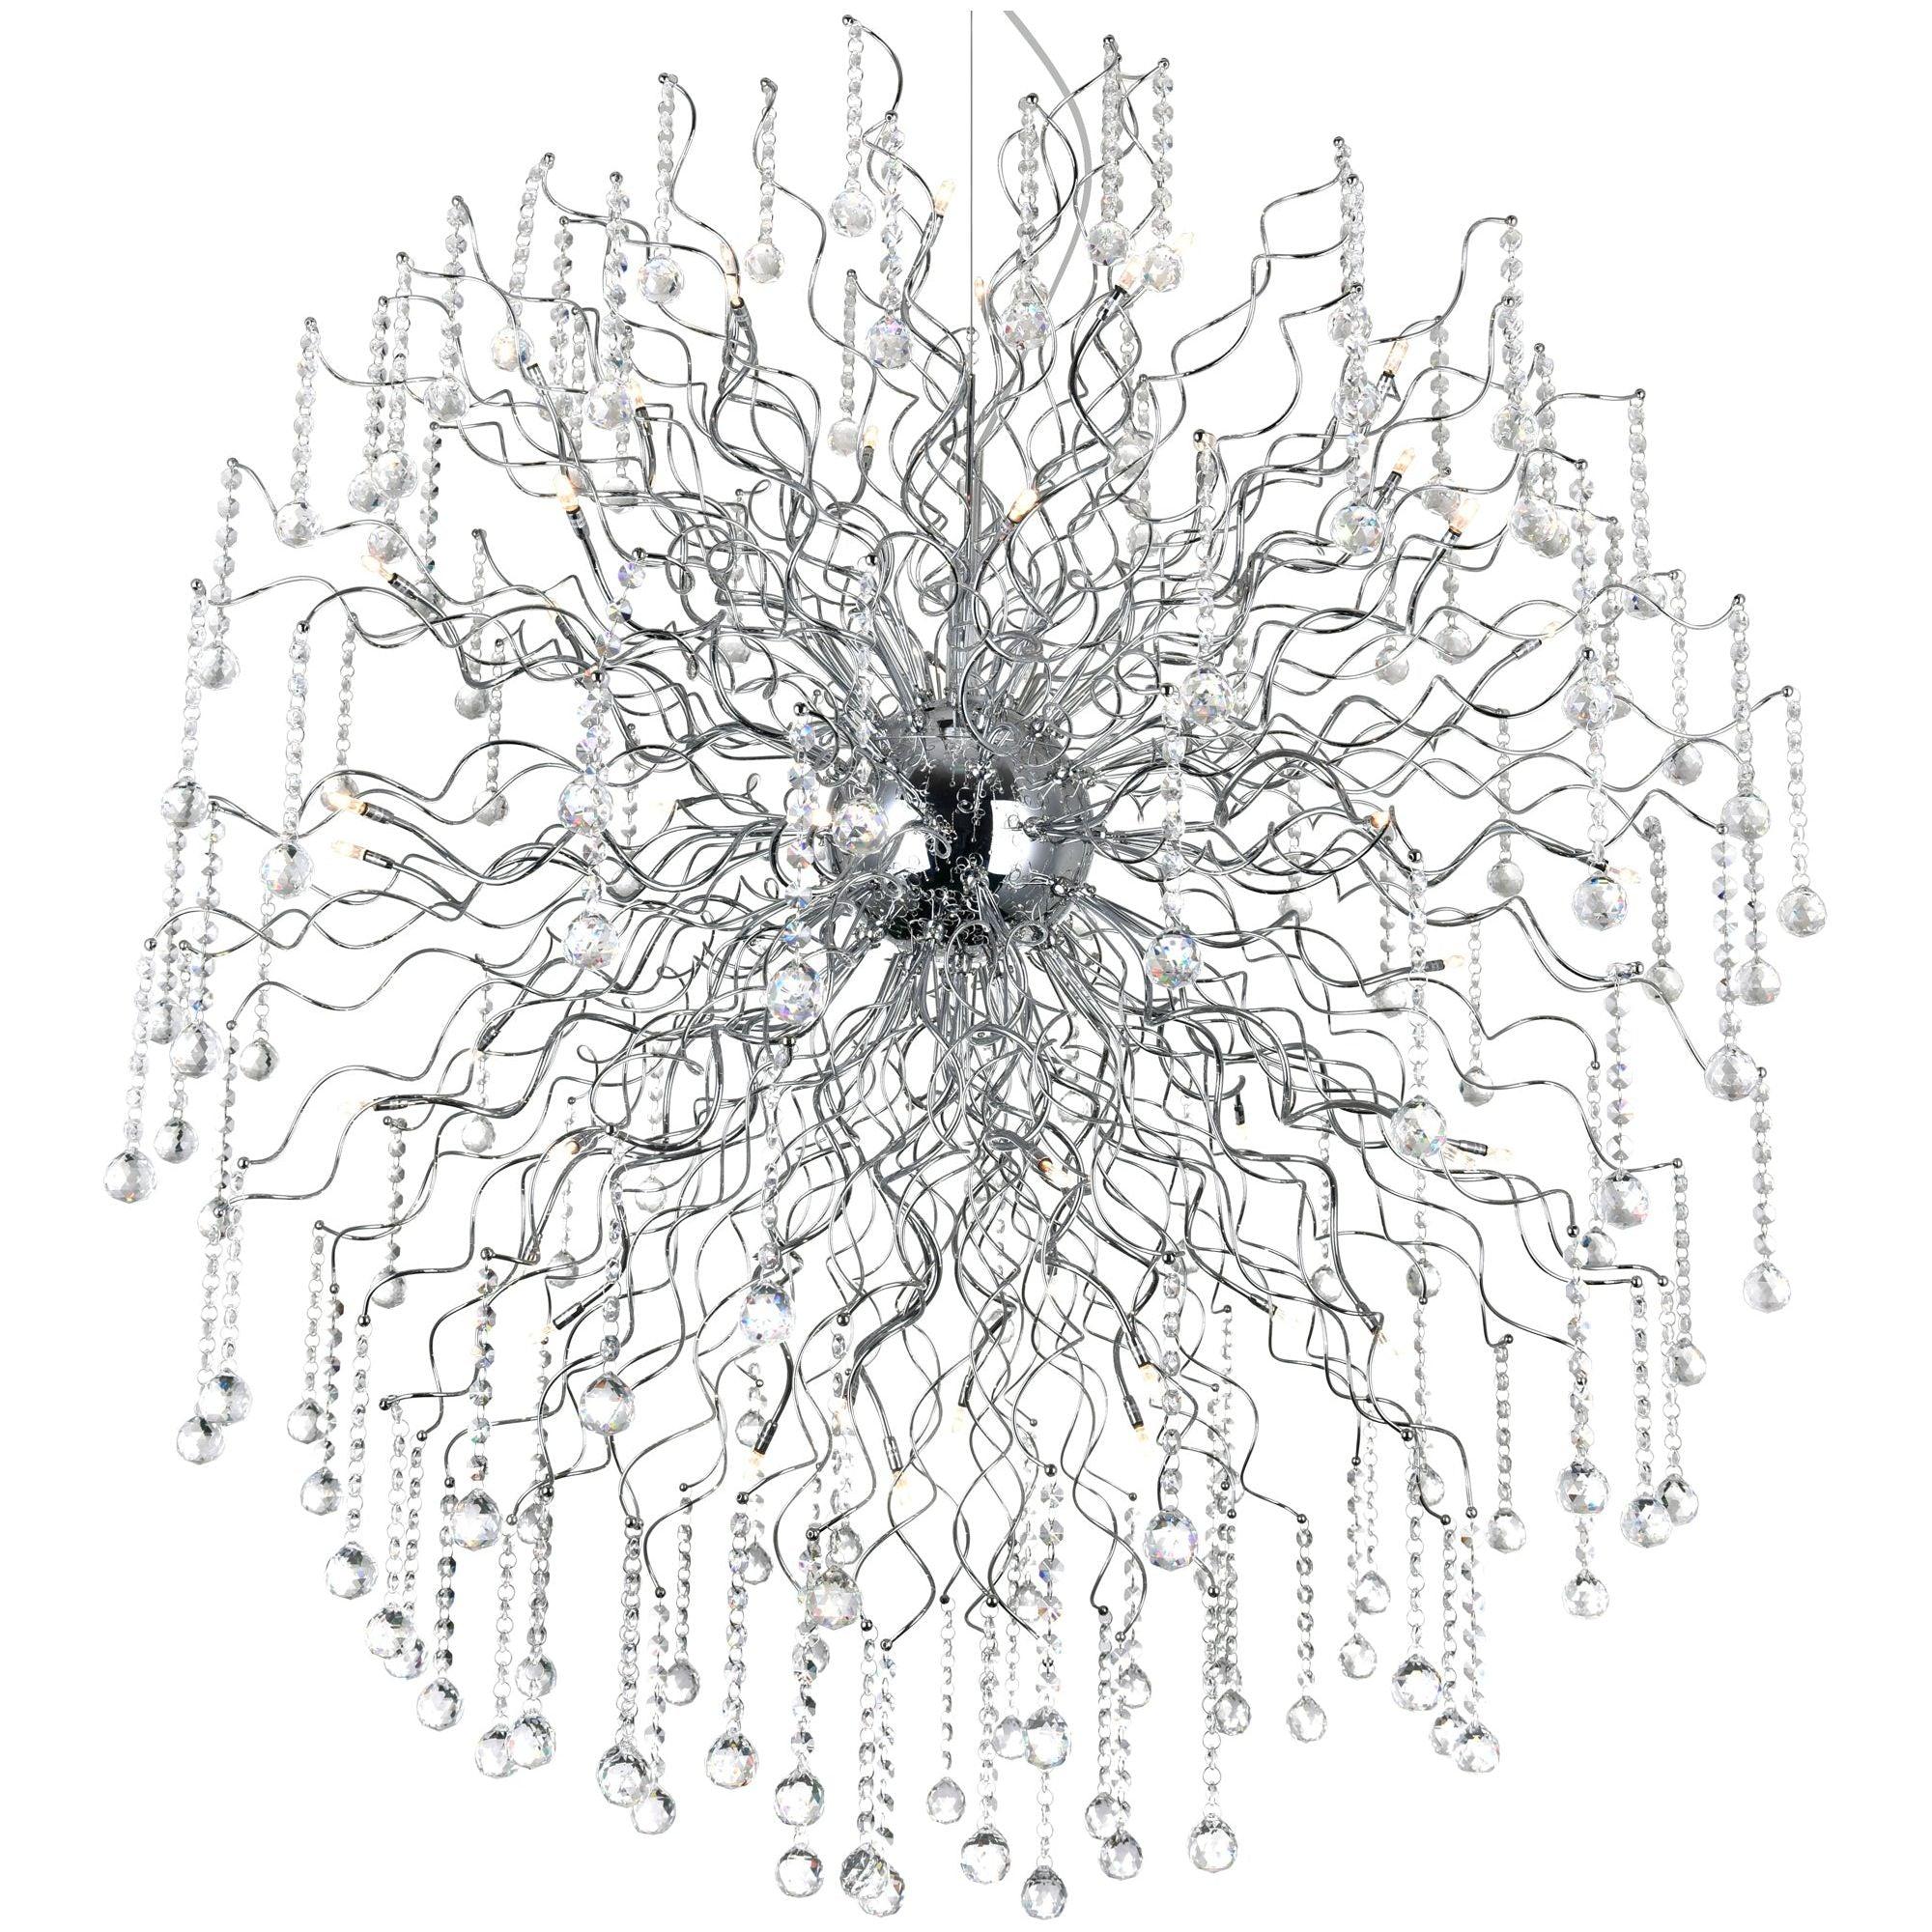 CWI - Cherry Blossom Chandelier - Lights Canada